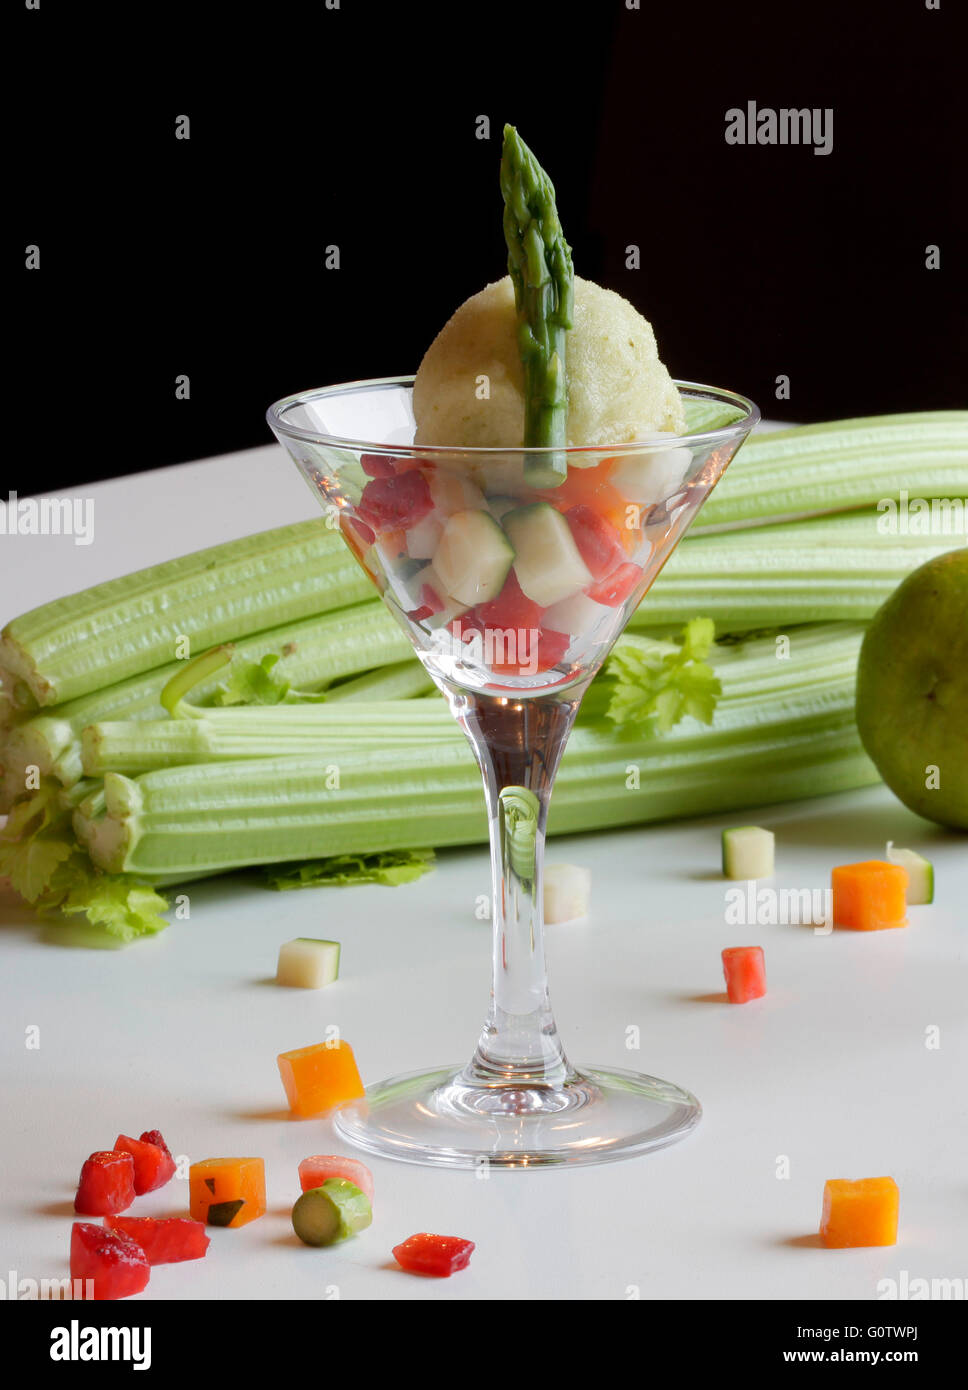 Celery ice with aspargus, lime and fruit salad. Stock Photo